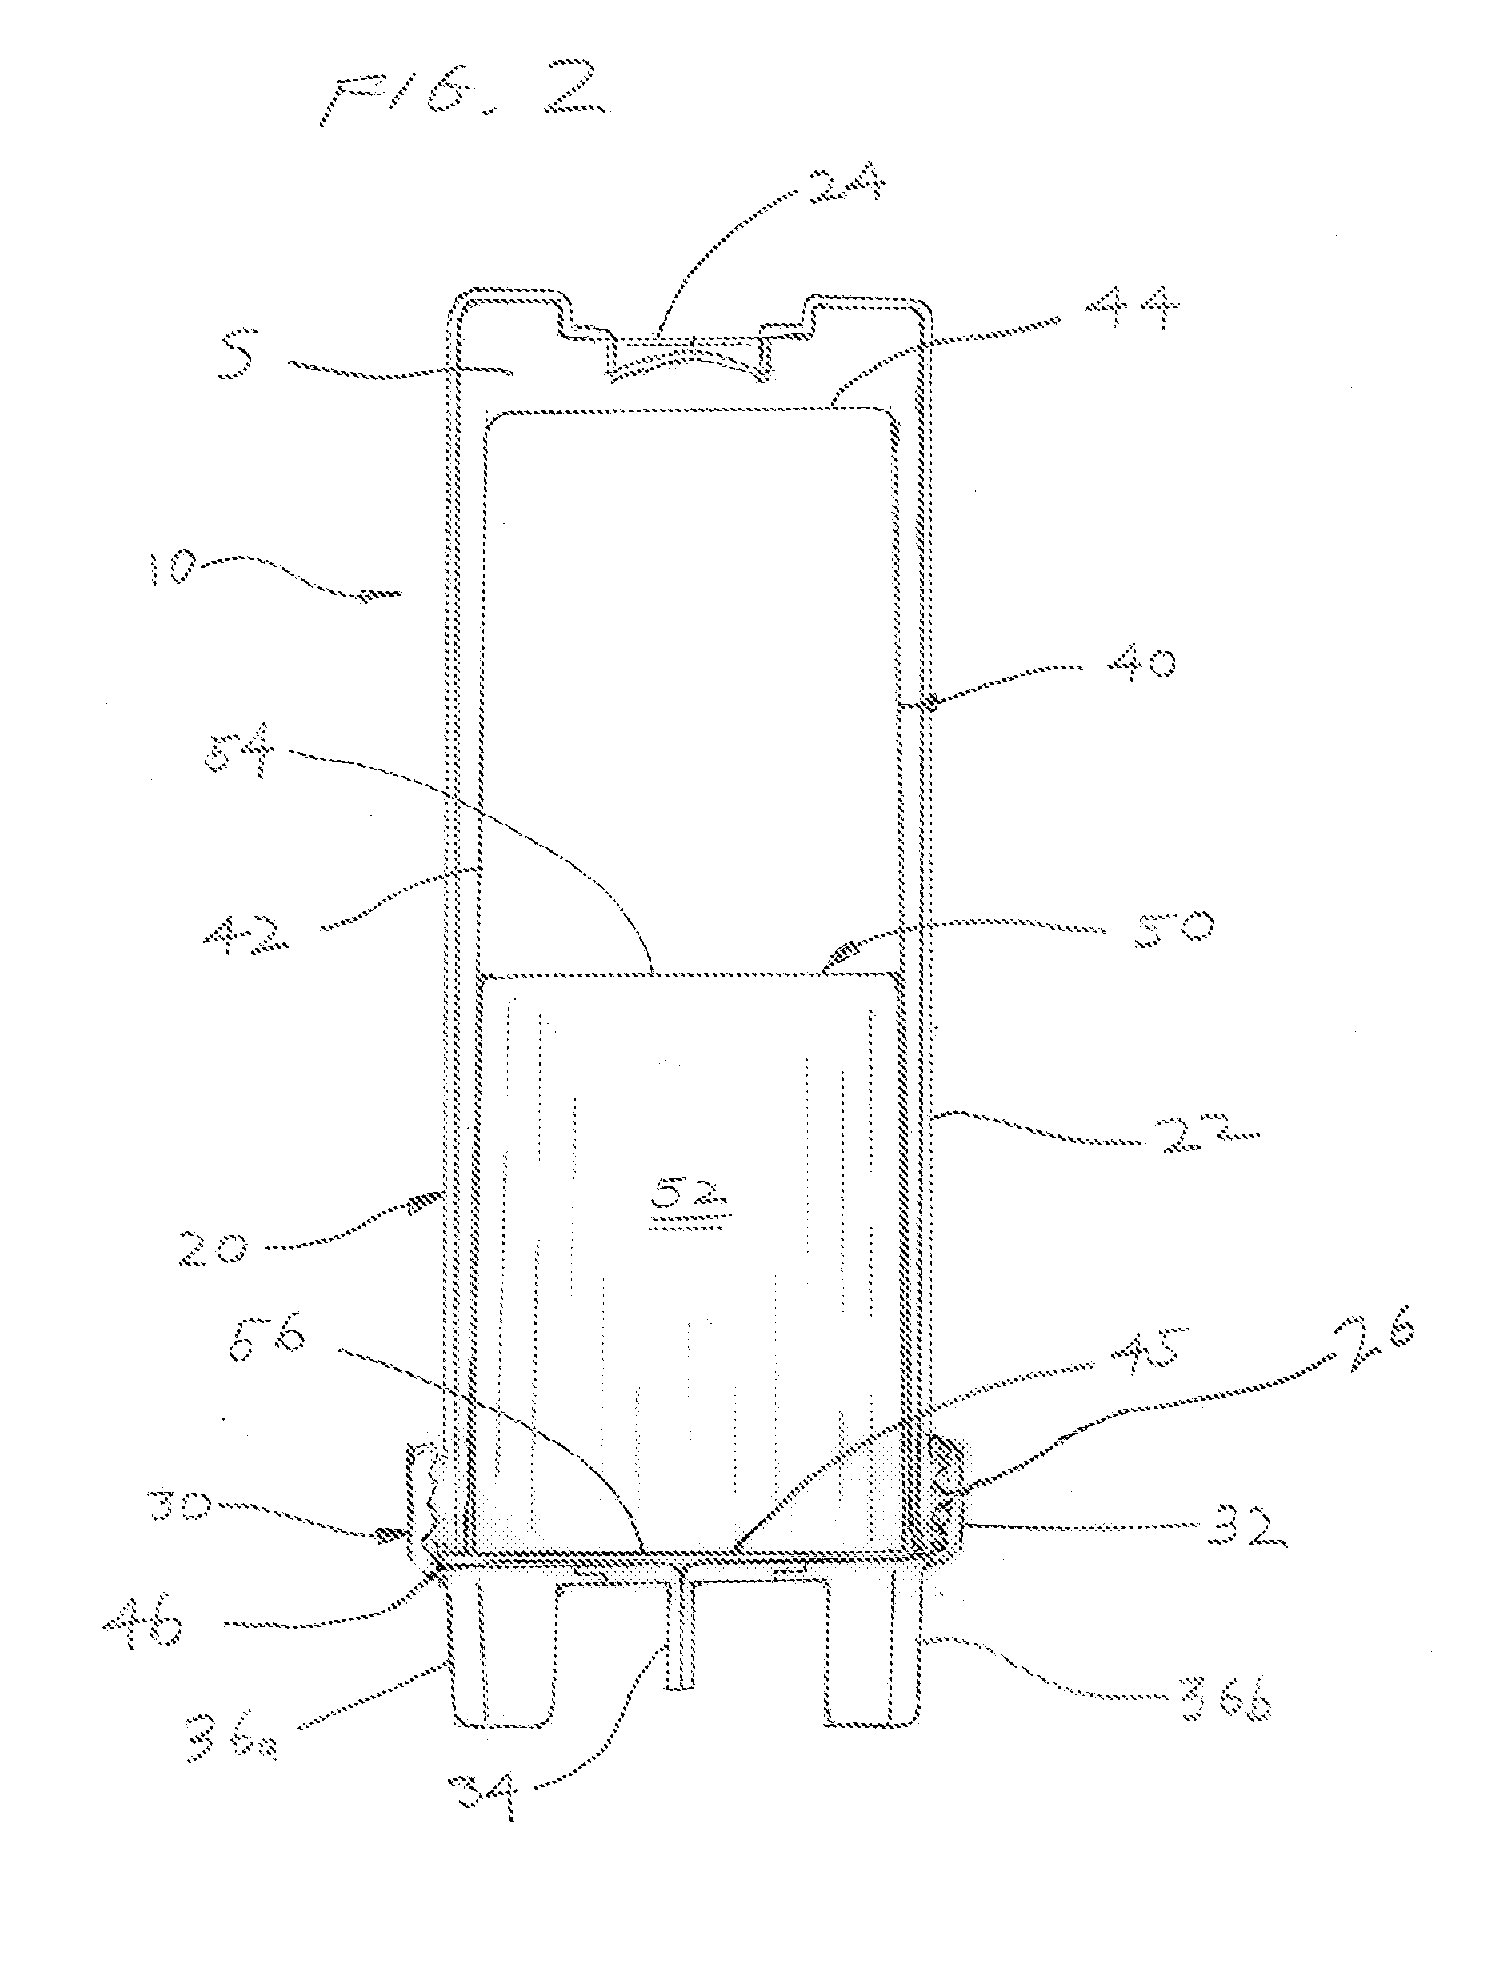 Fluid dispenser, system and filling process